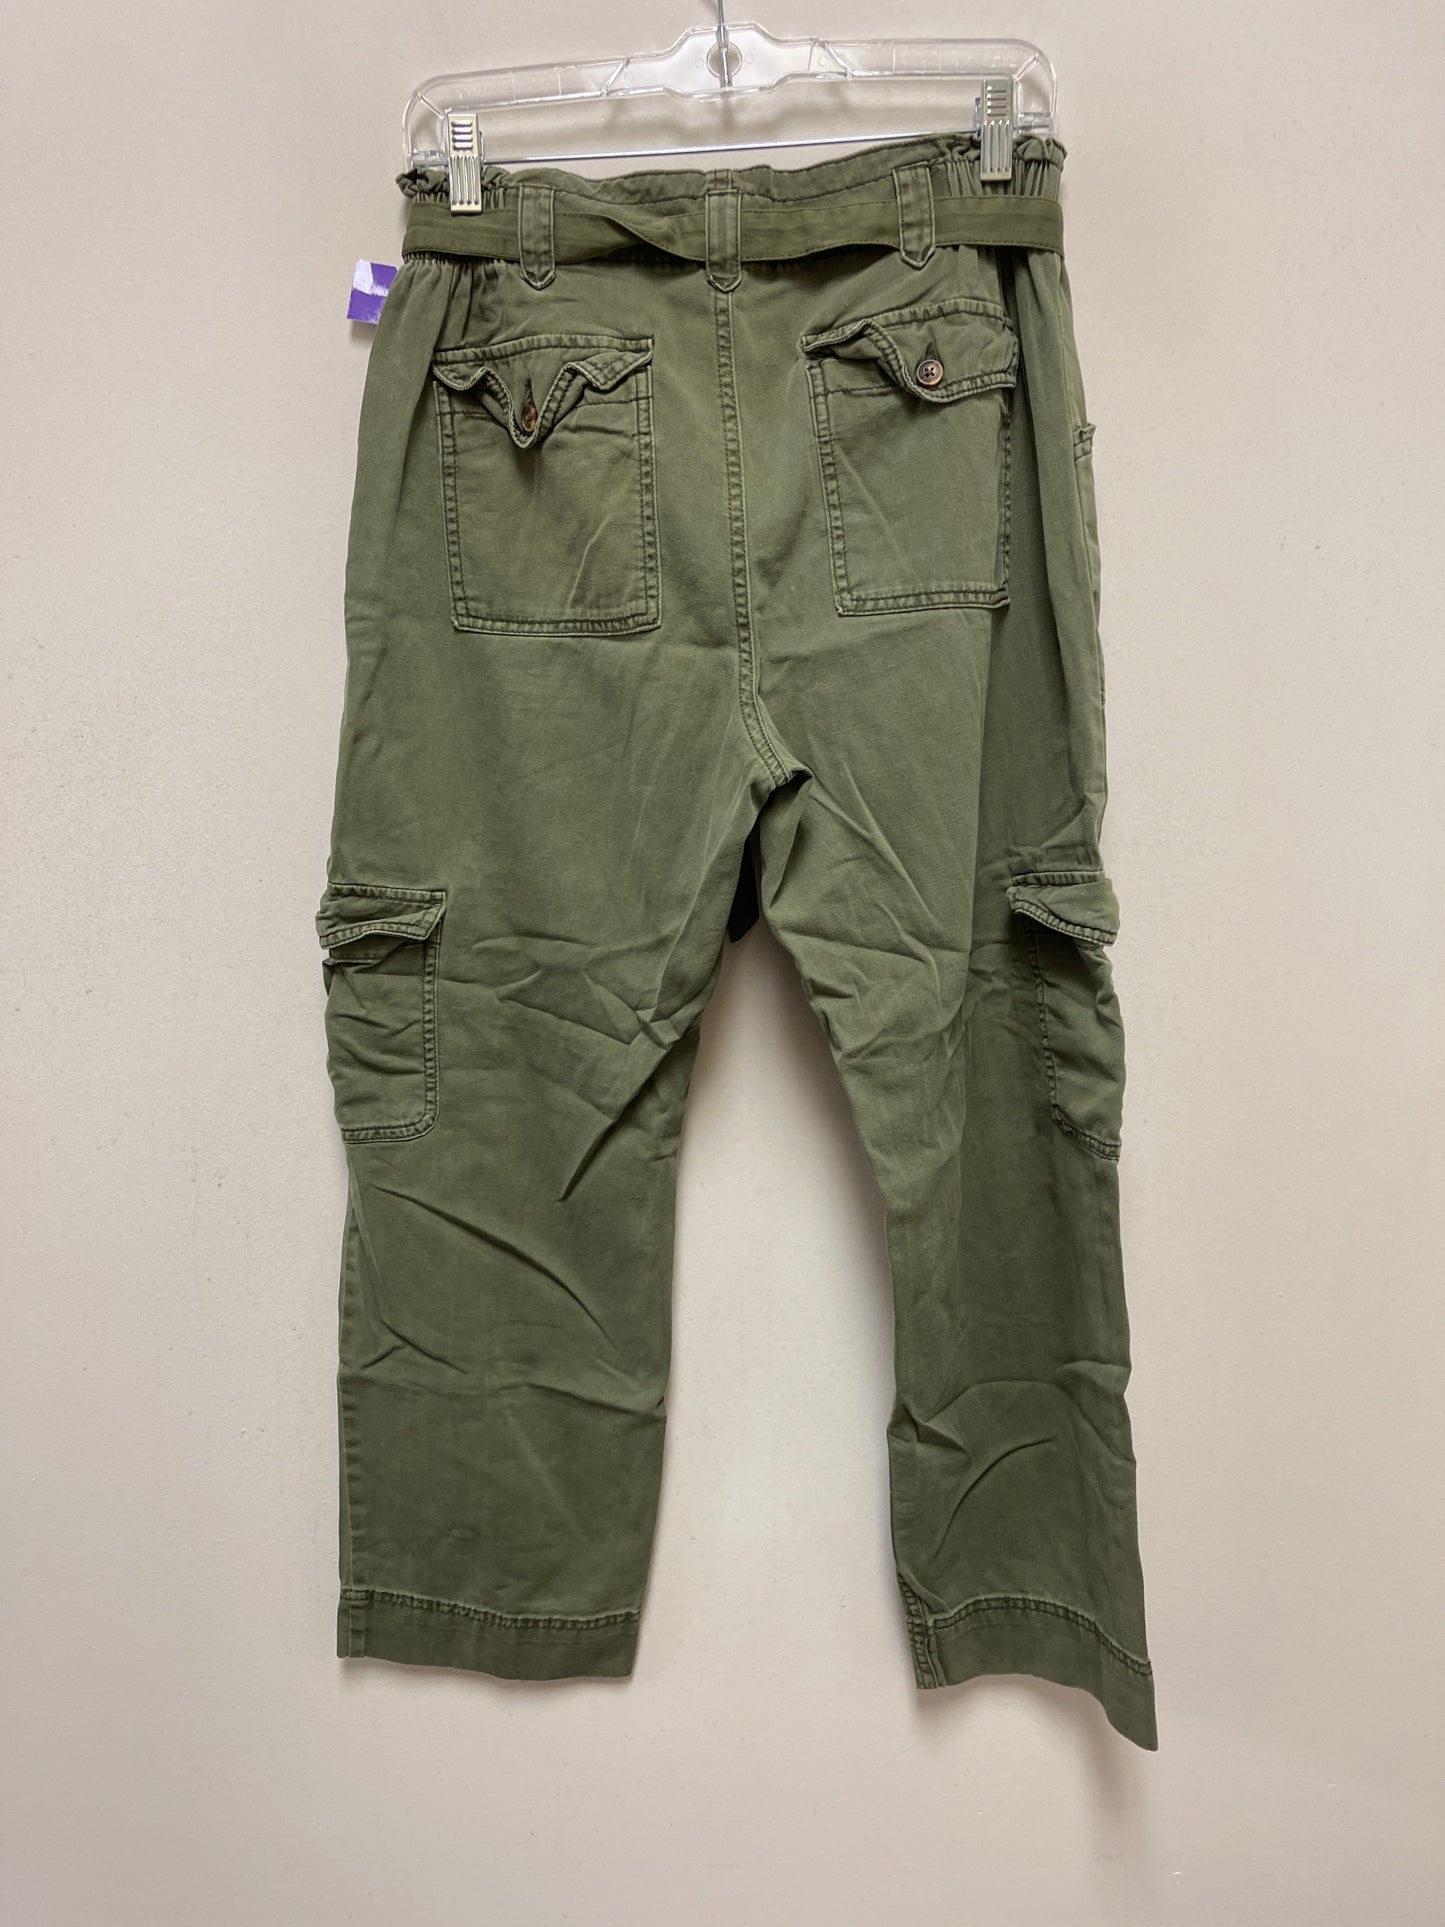 Green Pants Cargo & Utility Old Navy, Size S